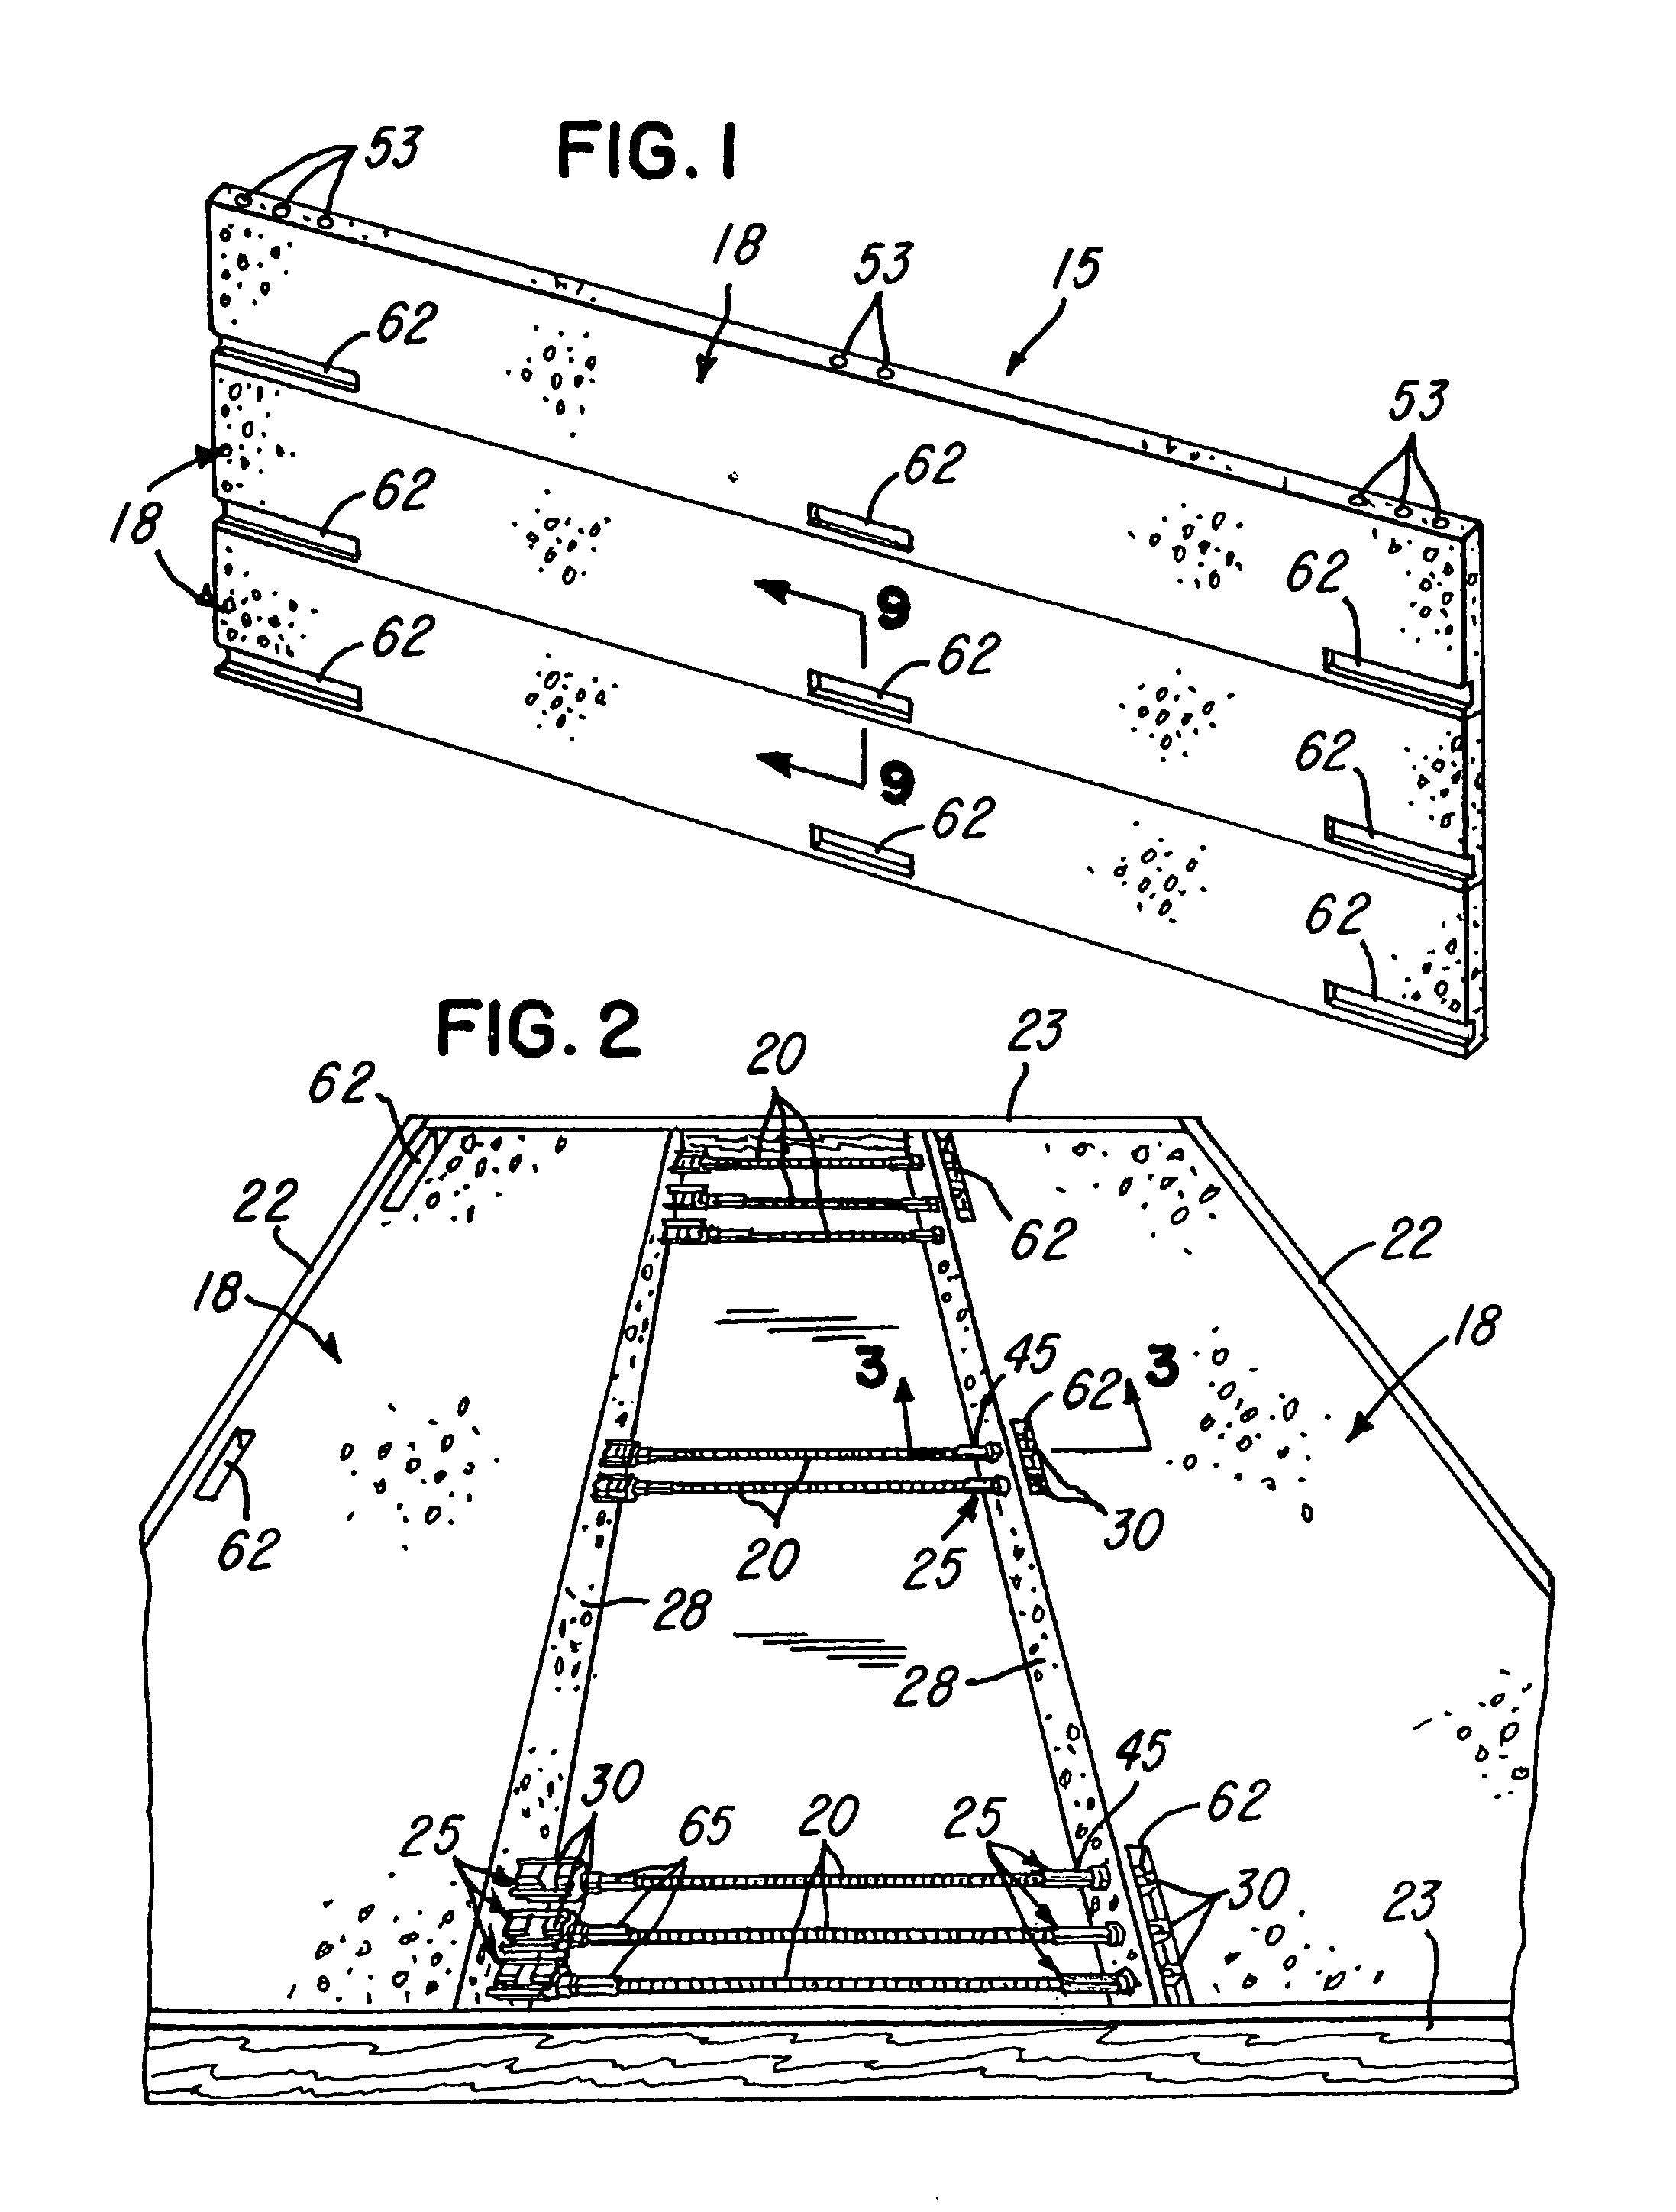 Coupler system for adjacent precast concrete members and method of connecting